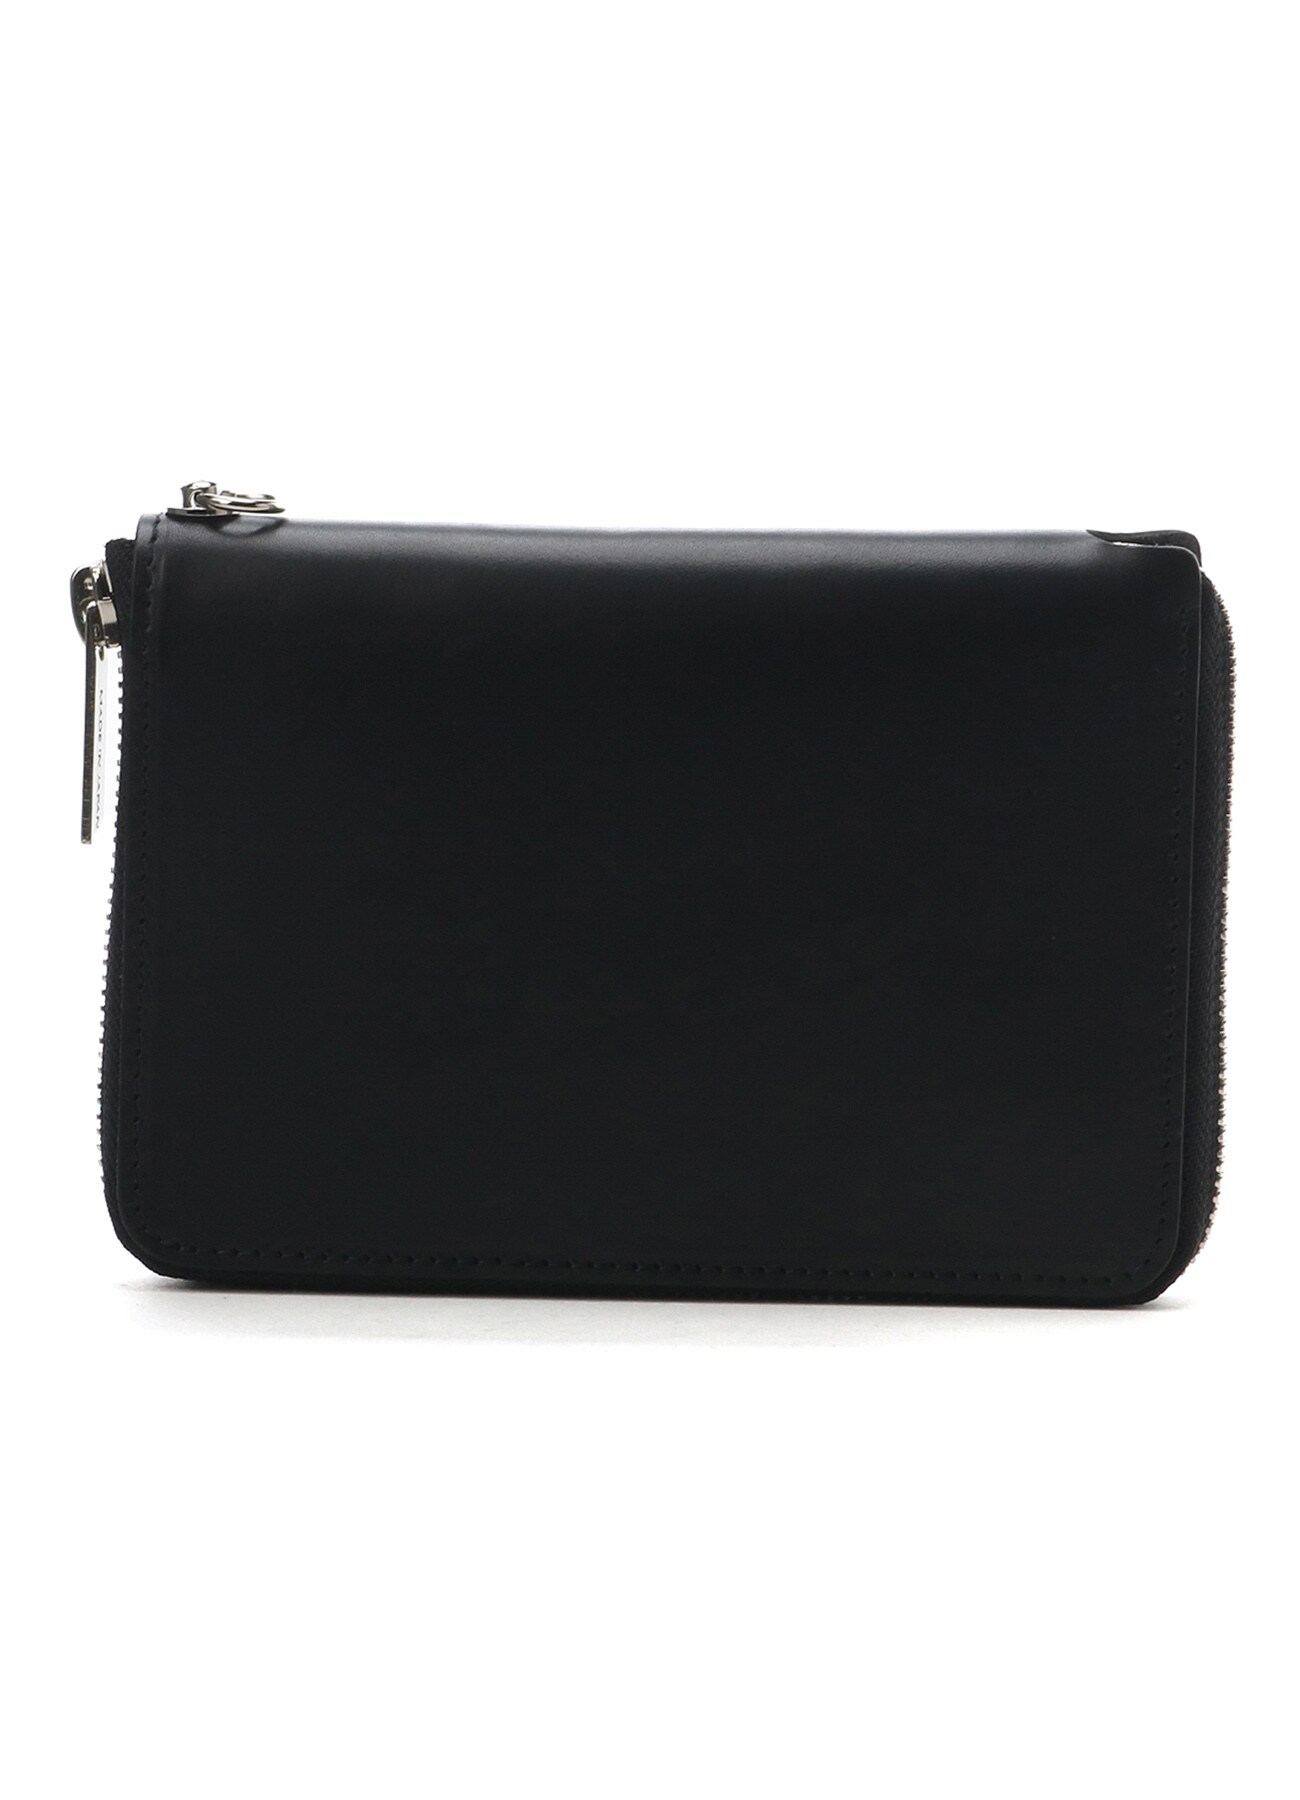 THICK UNFINISHED LEATHER ZIP WALLET S(FREE SIZE Black): Vintage 